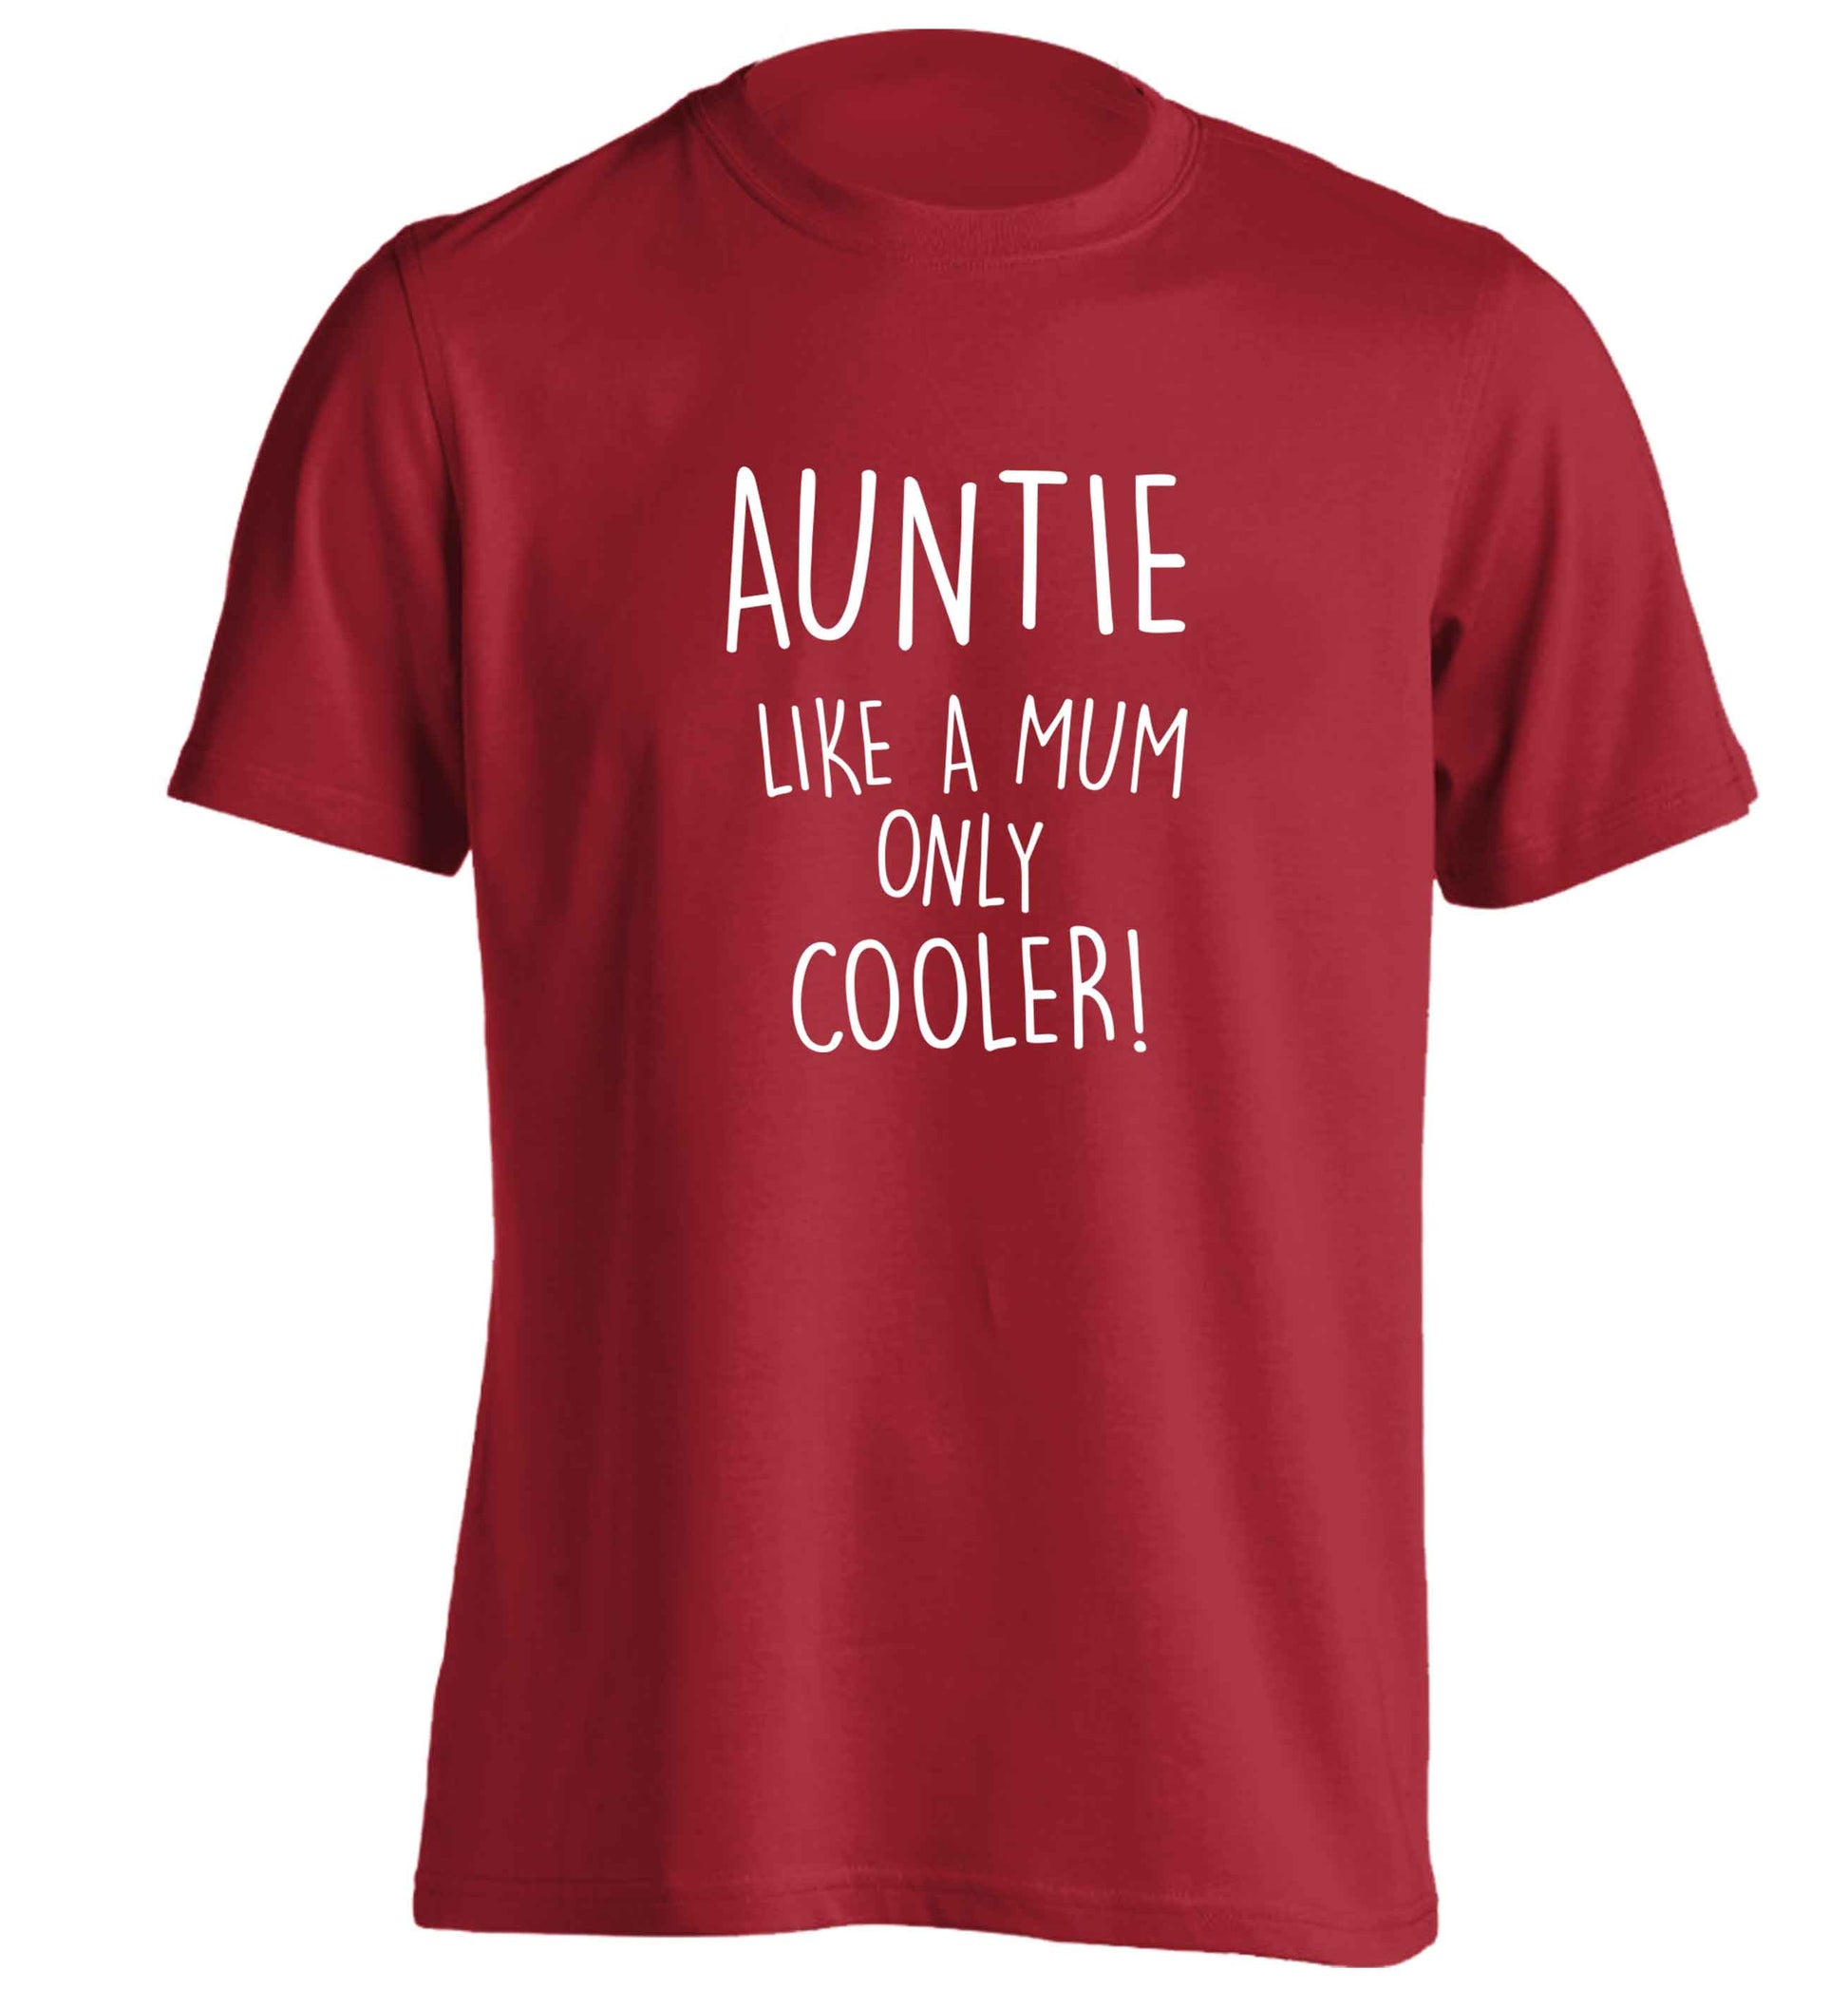 Auntie like a mum only cooler adults unisex red Tshirt 2XL